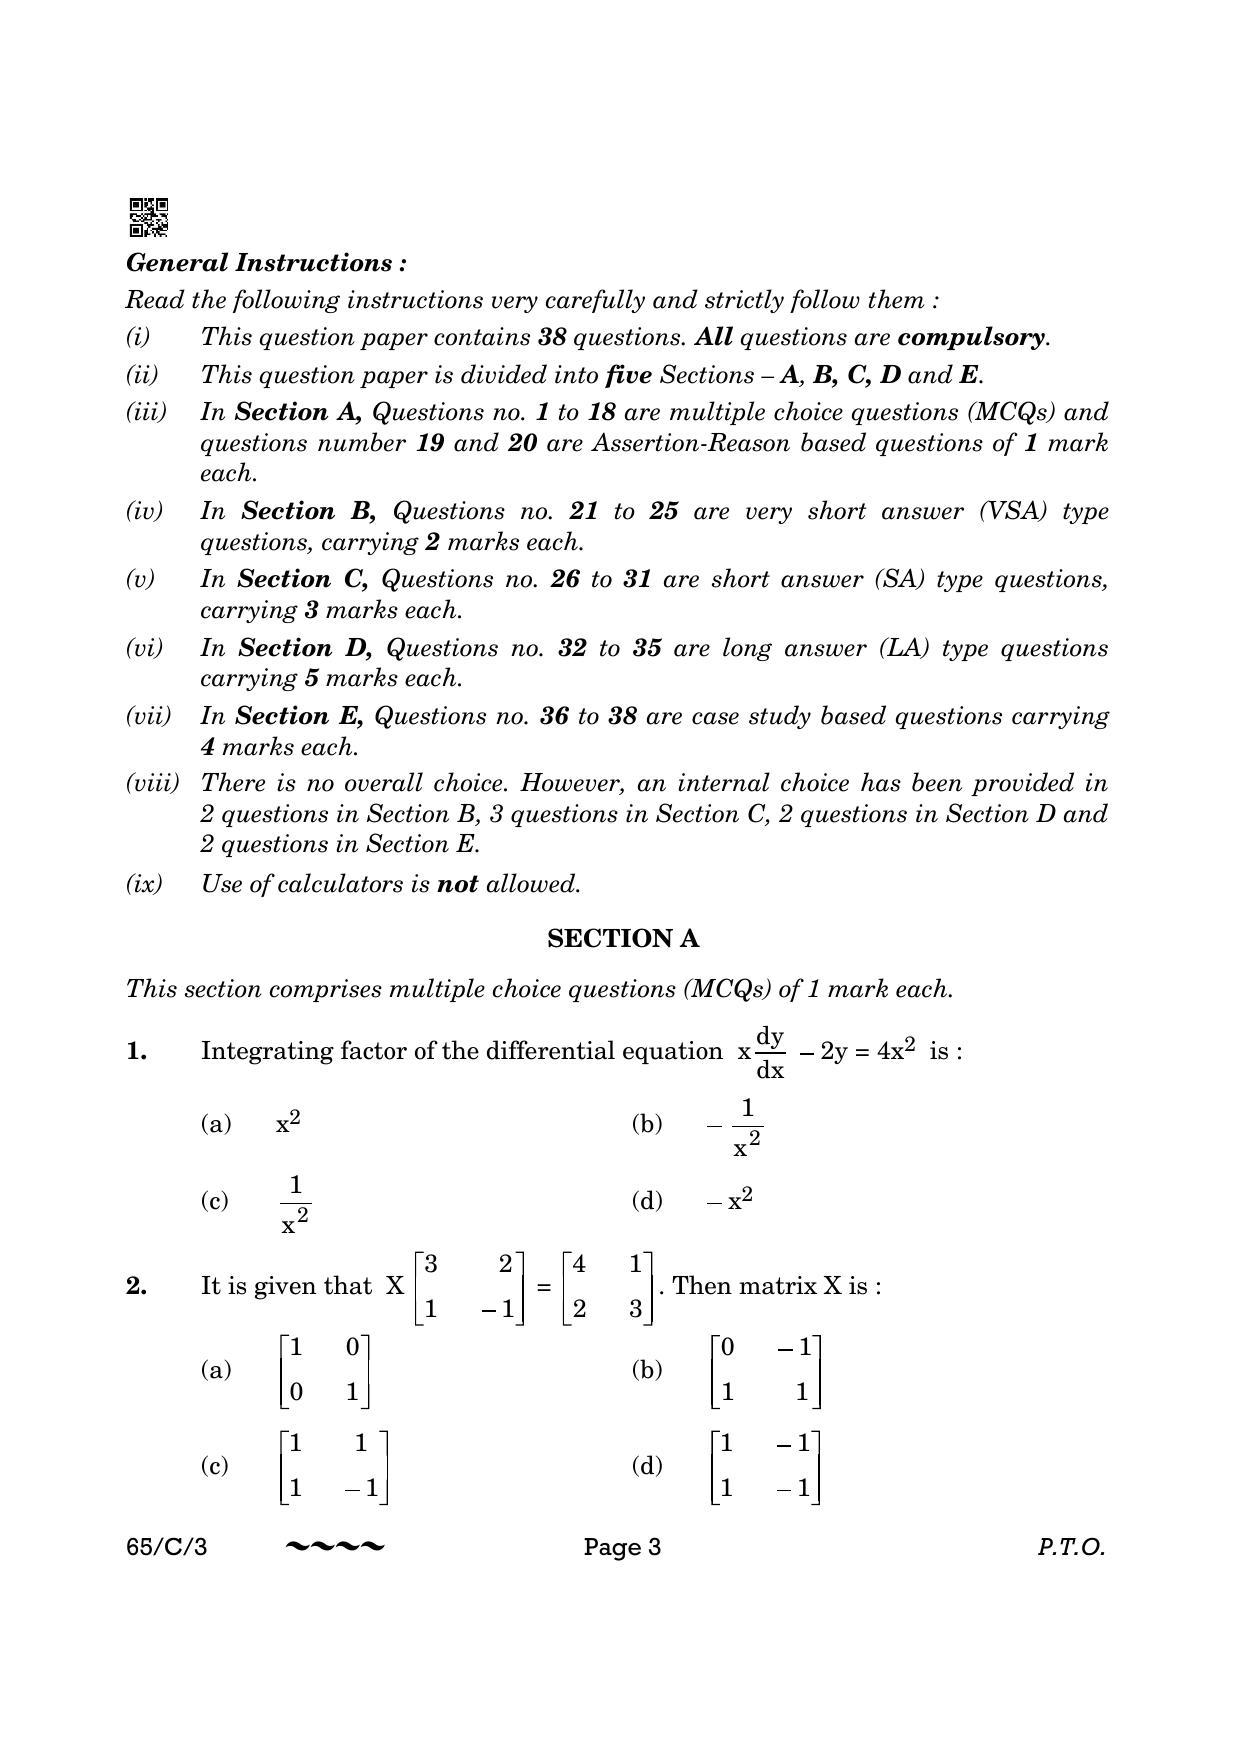 CBSE Class 12 65-3- Mathematics 2023 (Compartment) Question Paper - Page 3